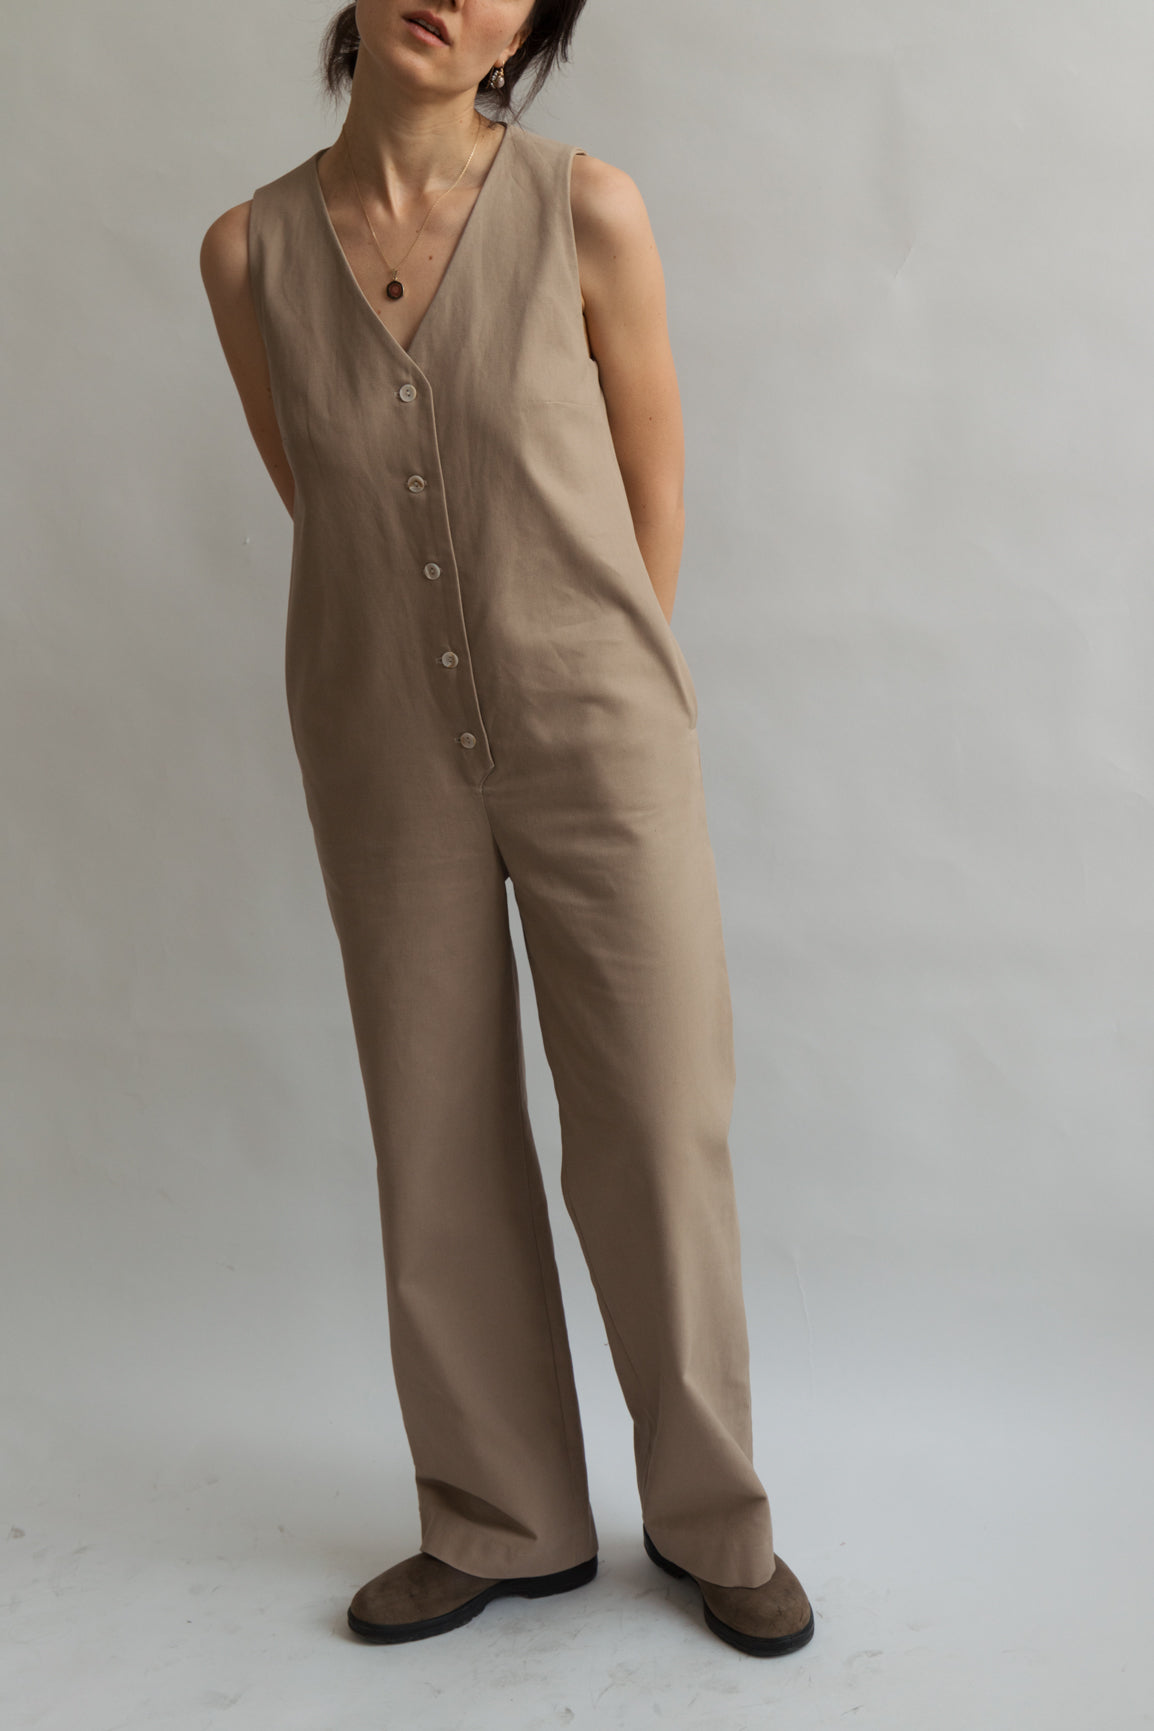 Beige color Jumpsuit workwear cotton canvas with pockets 5 buttons v-neck tall girls short girls oeko-tex 